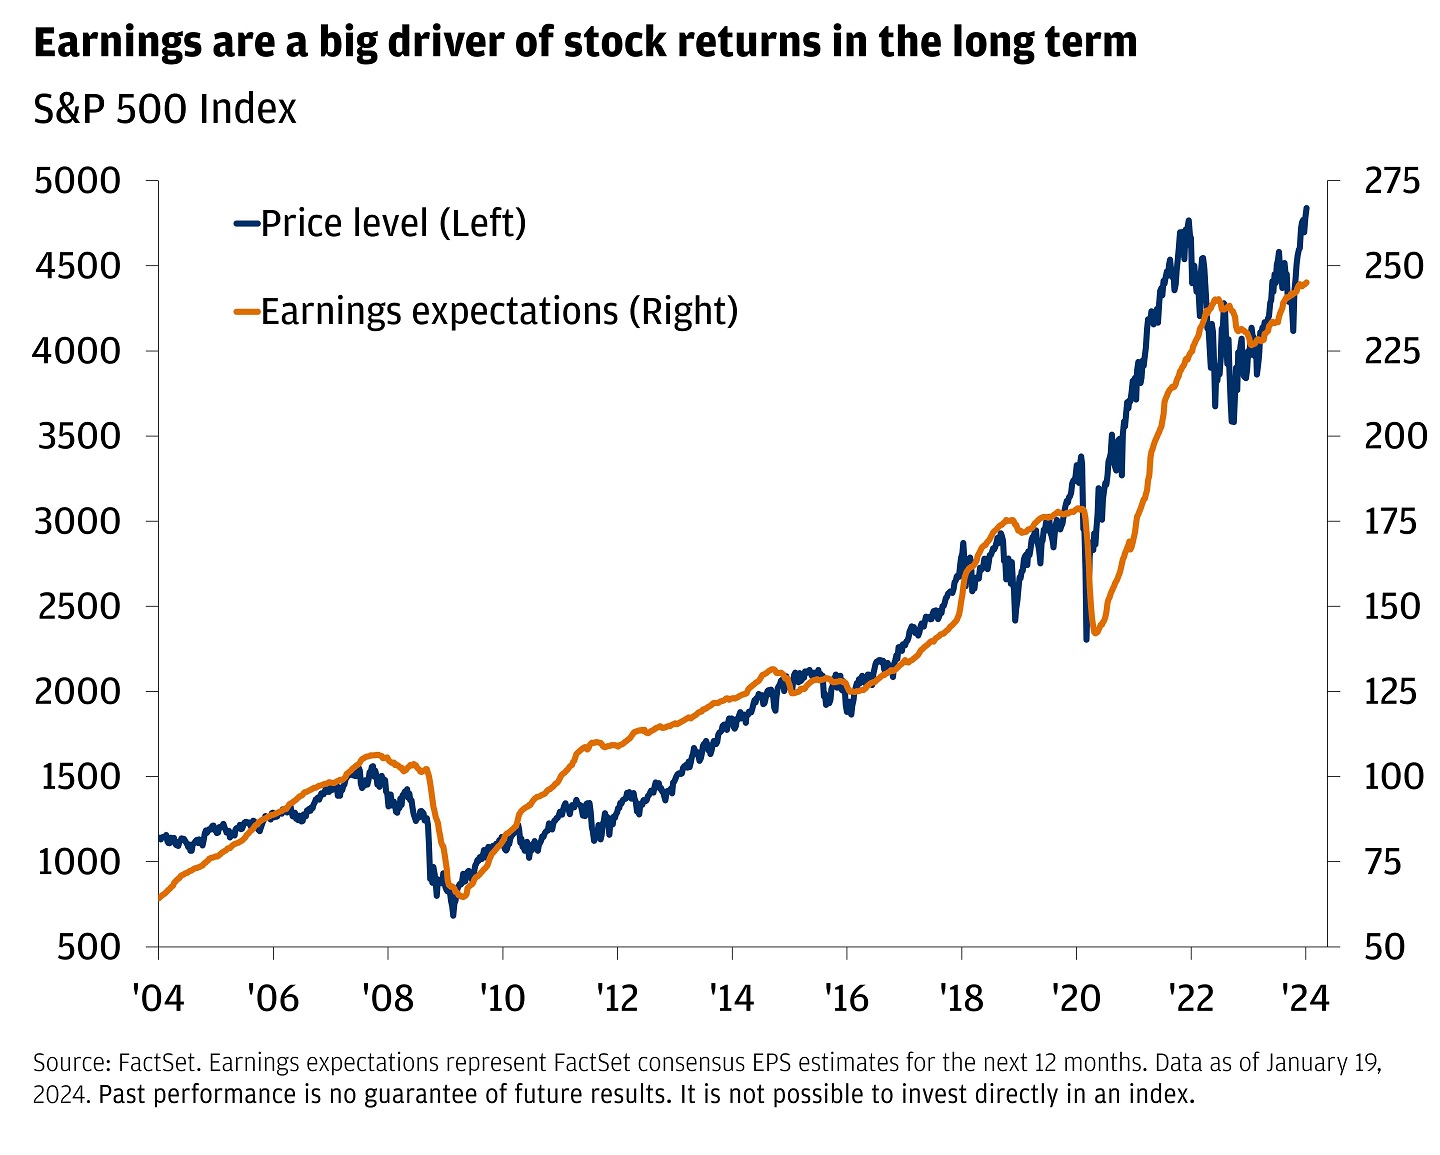 This chart shows earnings are a big driver of stock returns in the long term in the S&P 500 Index